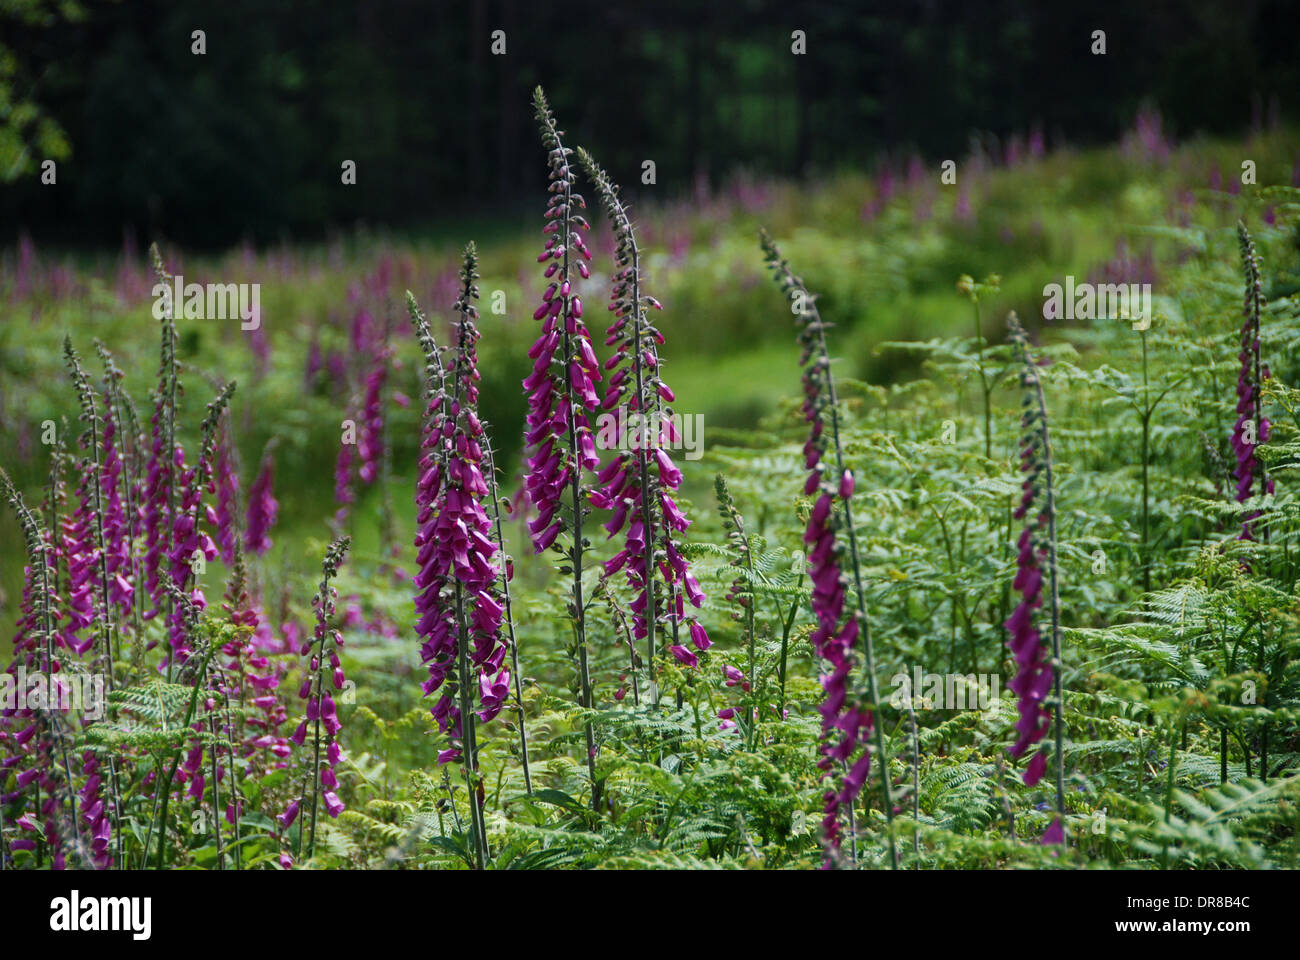 Foxgloves and ferns growing in a field Stock Photo